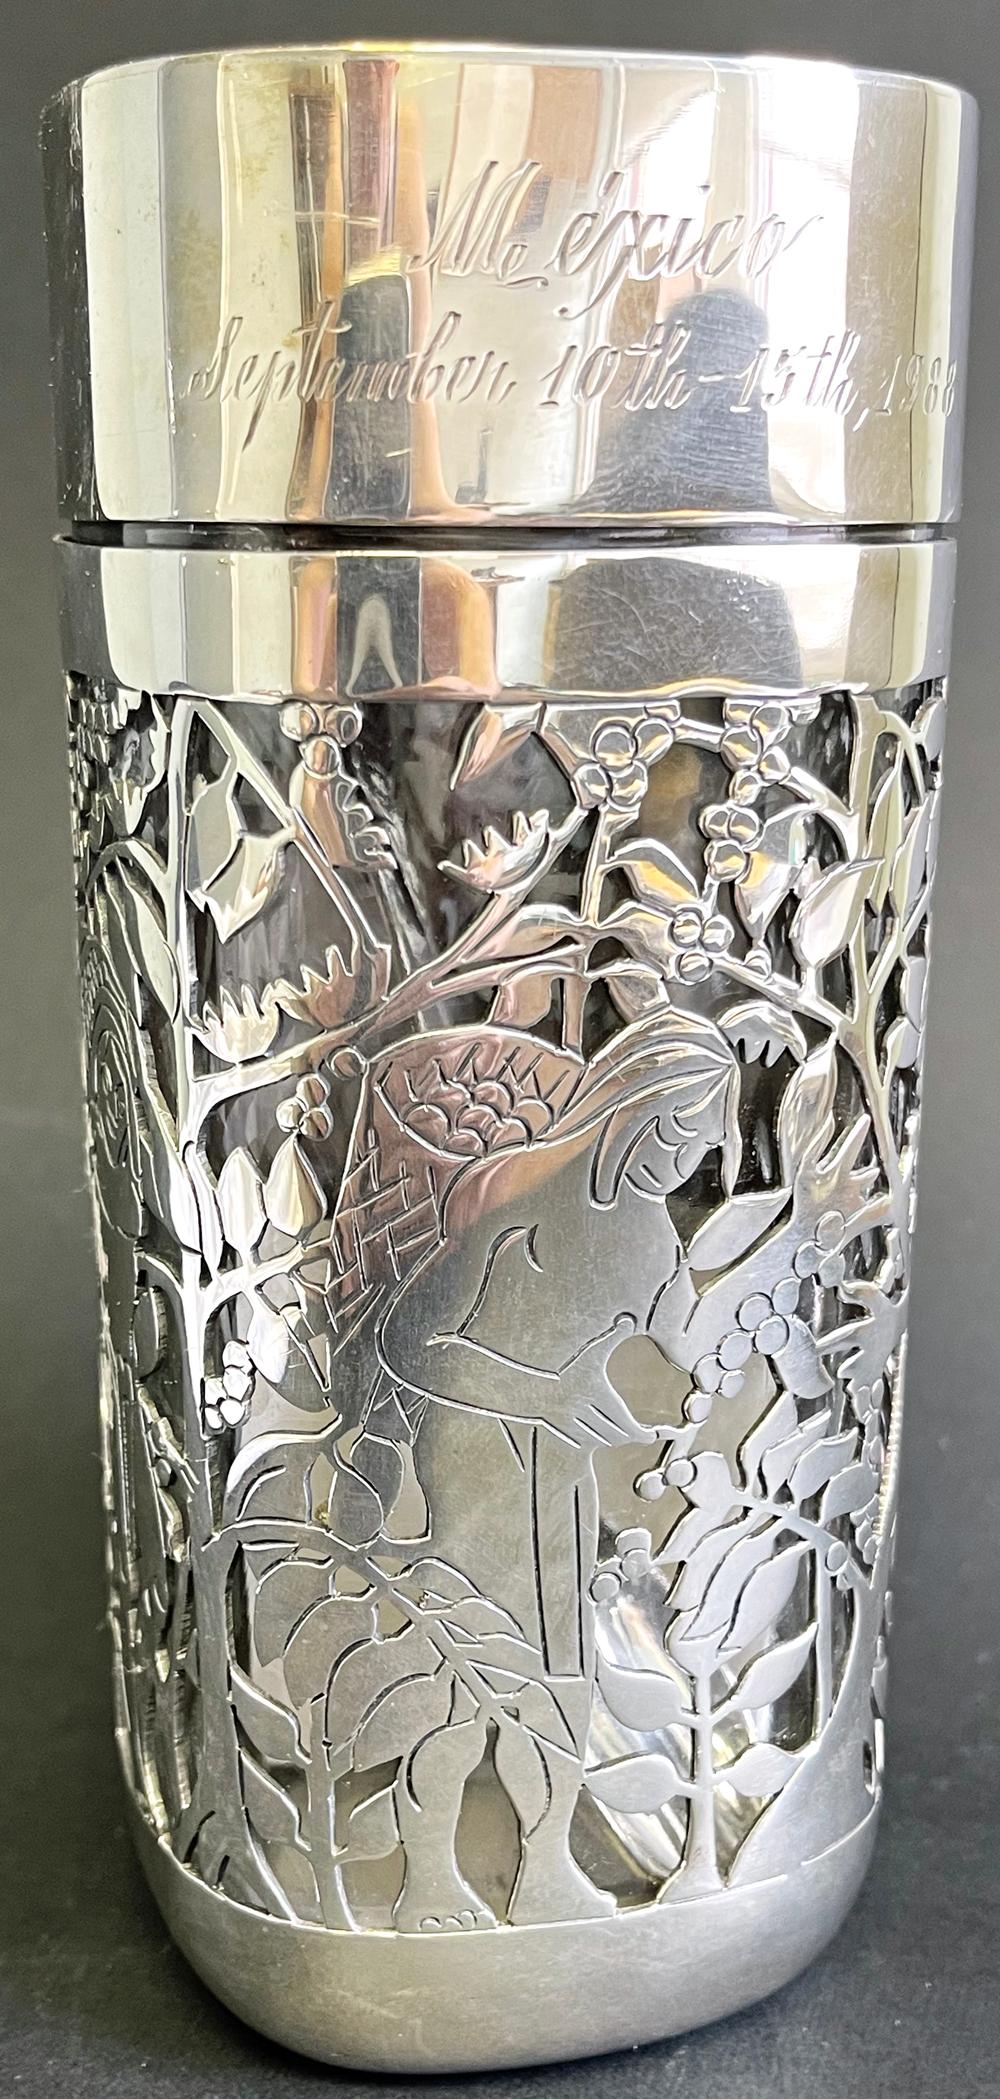 A remarkable piece of sterling silver artistry and commercial history, this pierced silver container was commissioned by the Nestlé company to mark a visit by its Board of Directors to Mexico in 1988. Nestlé has had a major presence in Mexico for